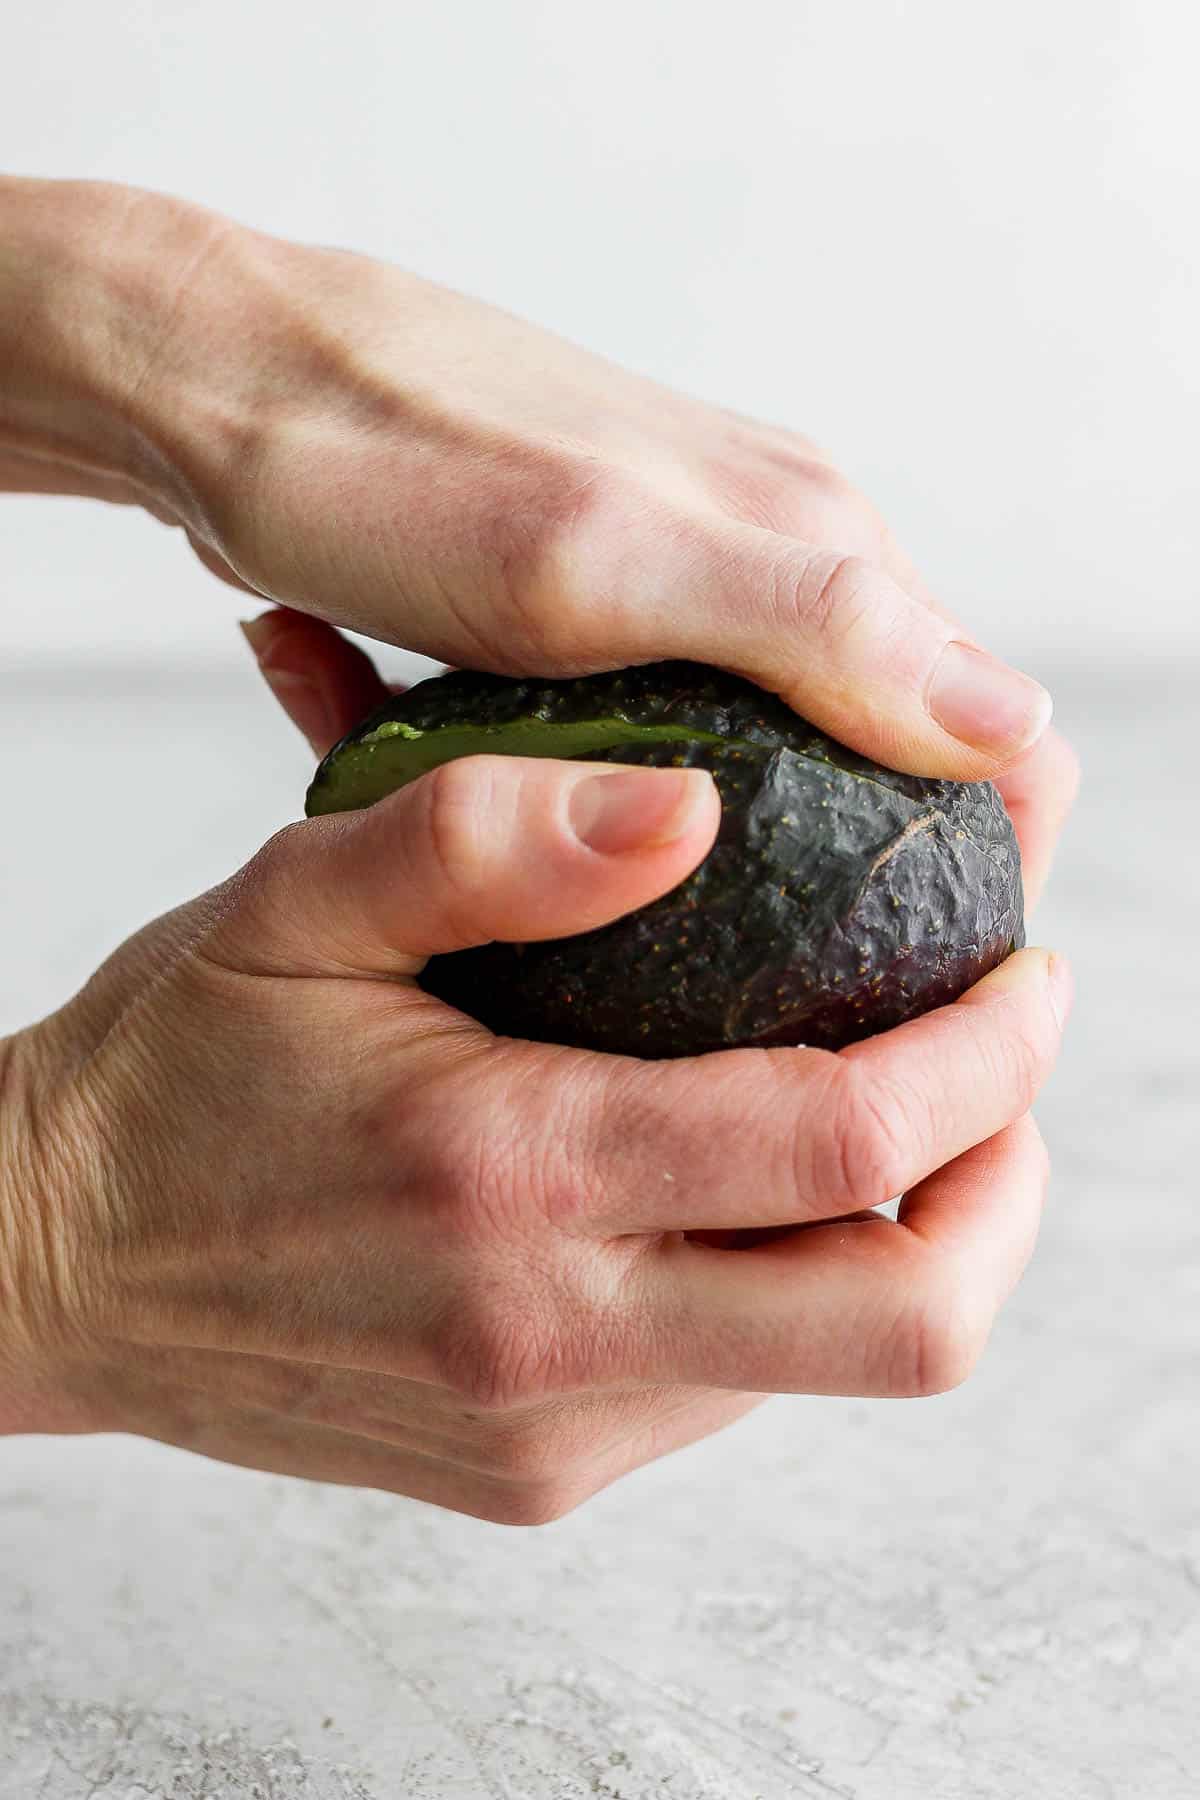 Two hand twisting an avocado into two halves.